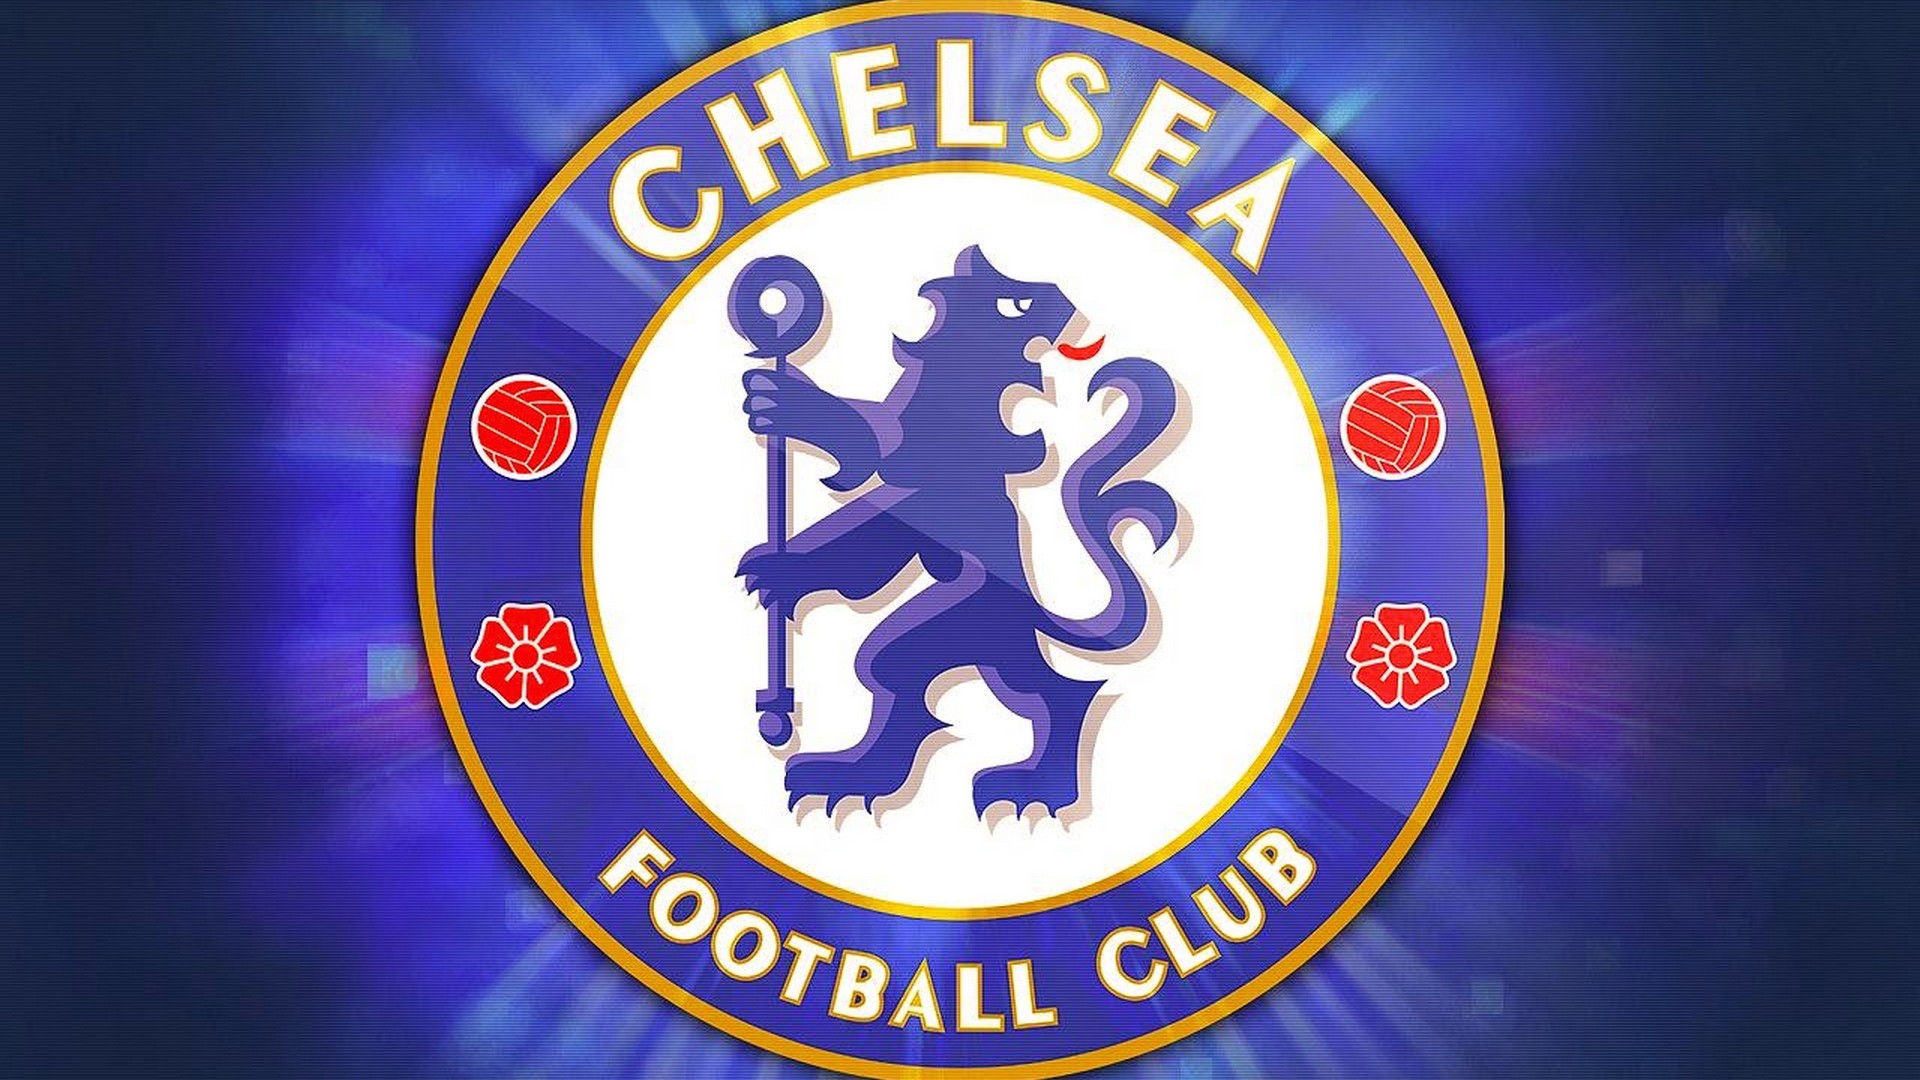 Chelsea FC Wallpaper With Resolution 1920X1080 pixel. You can make this wallpaper for your Mac or Windows Desktop Background, iPhone, Android or Tablet and another Smartphone device for free